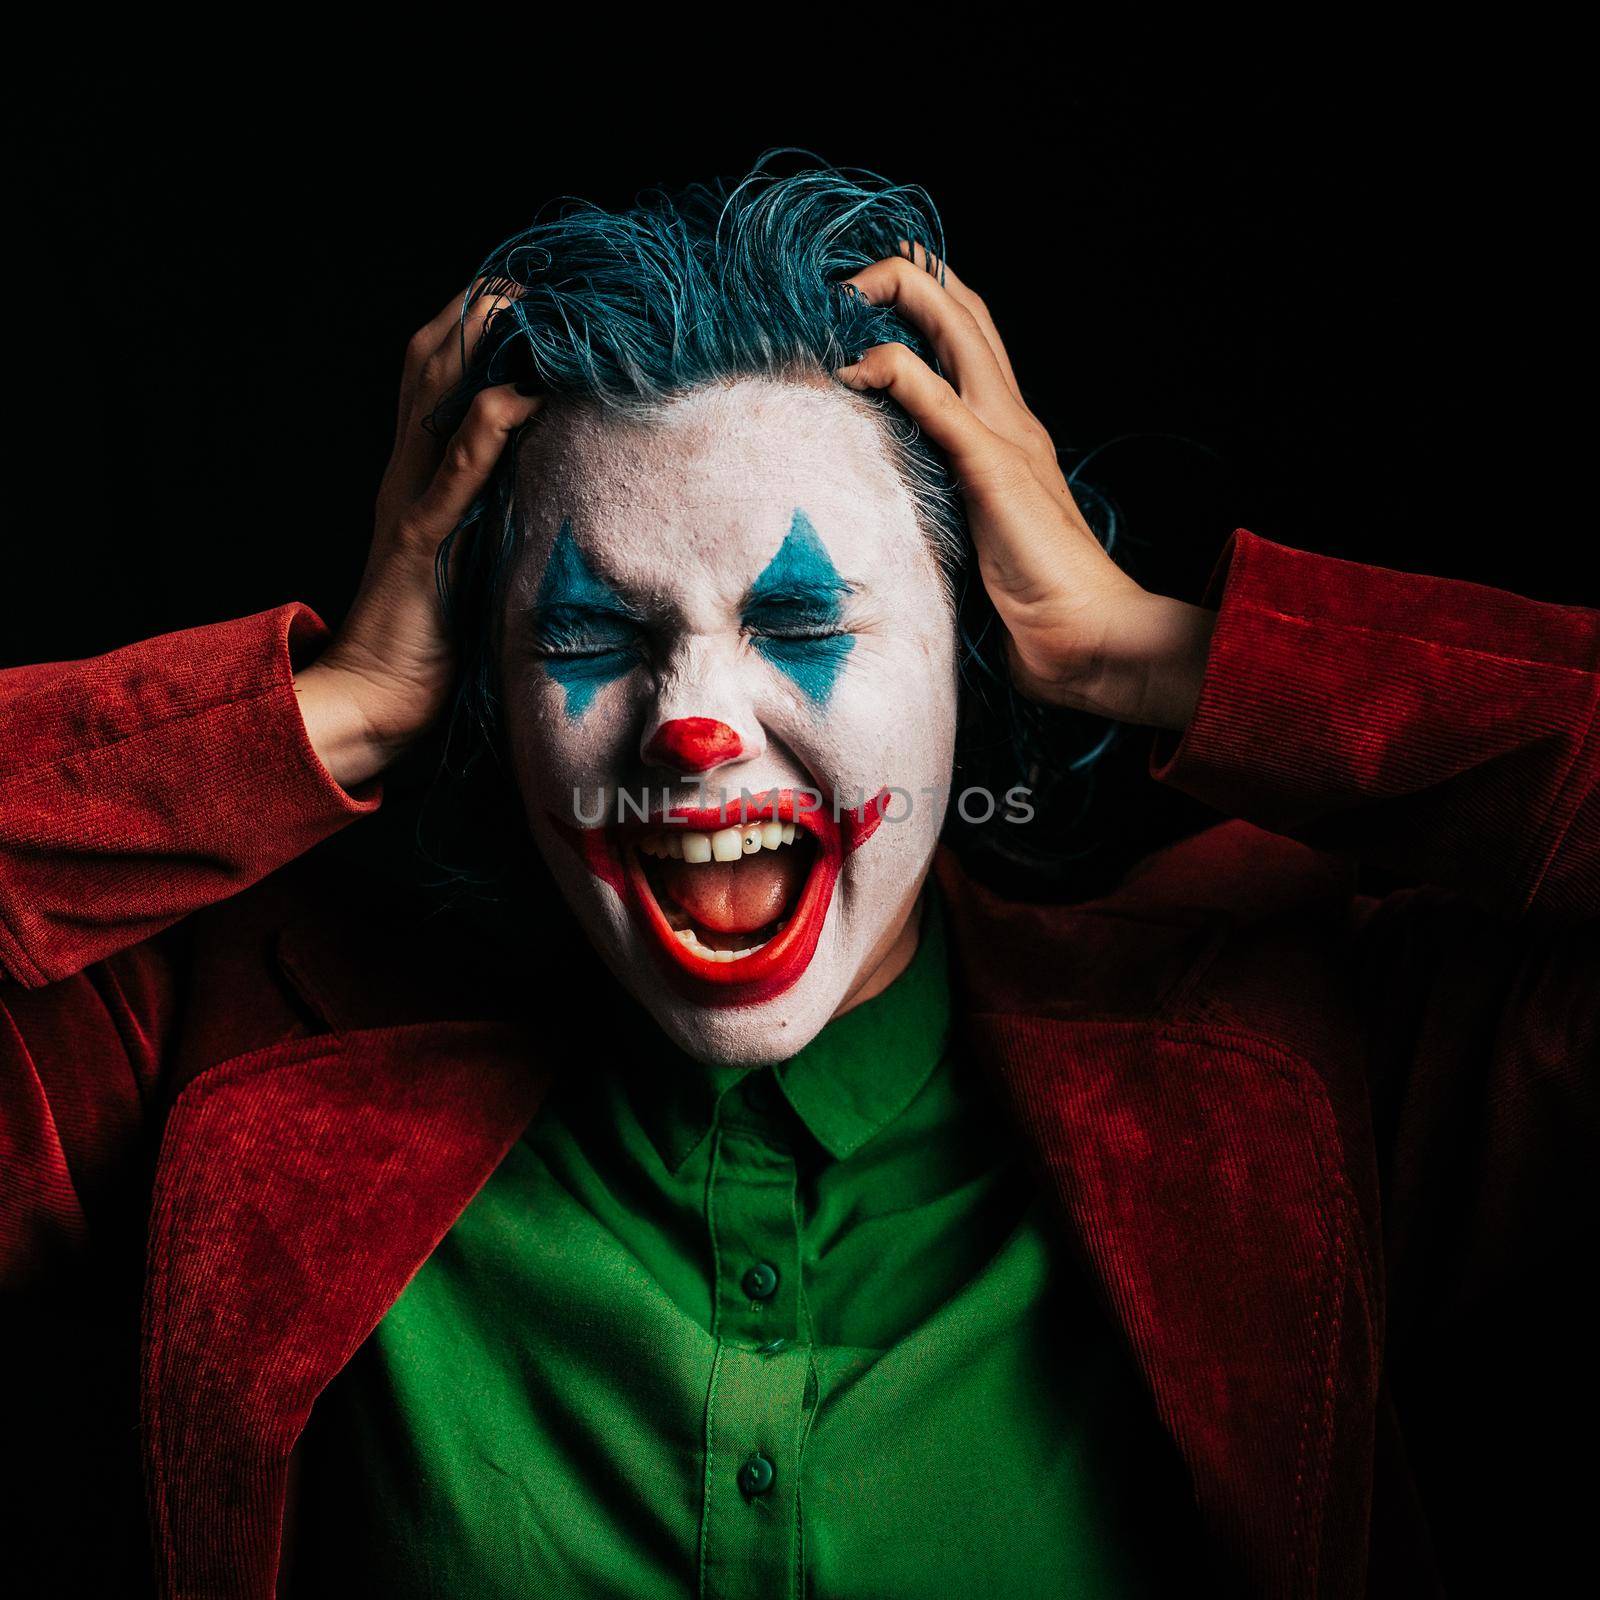 Make-up Joker with green hair for Halloween. Close-up screaming face on black background. by kristina_kokhanova